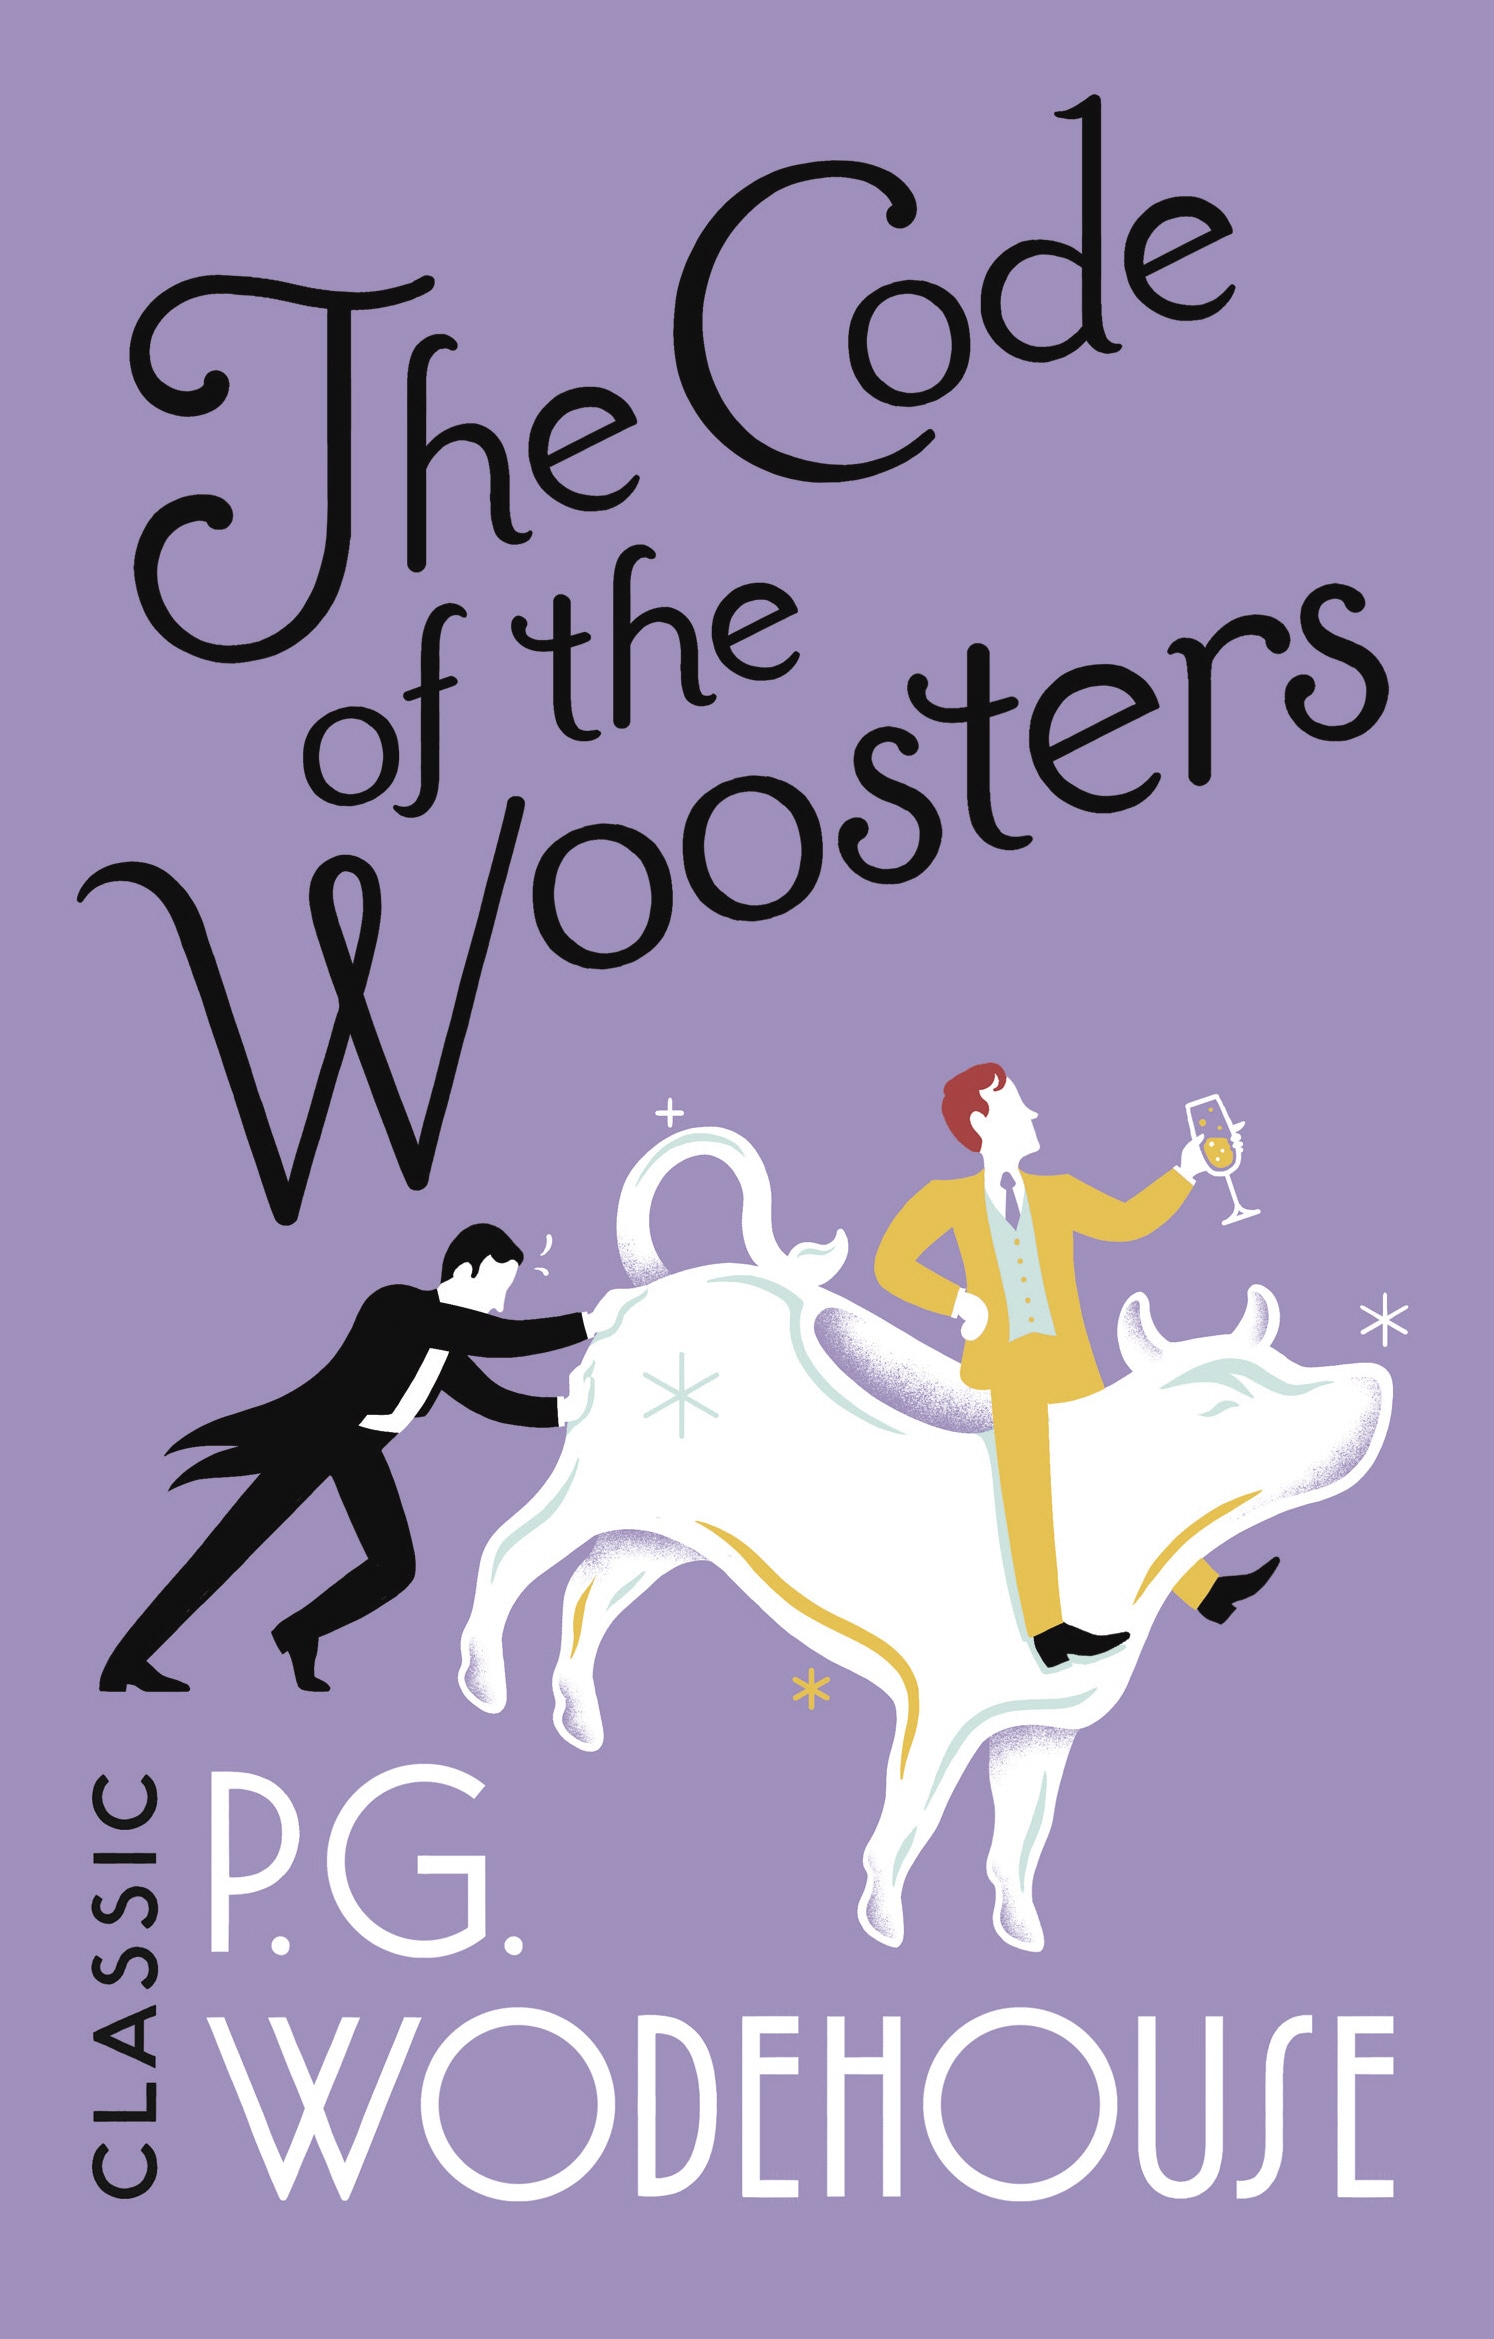 Book “The Code of the Woosters” by P.G. Wodehouse — June 28, 2018